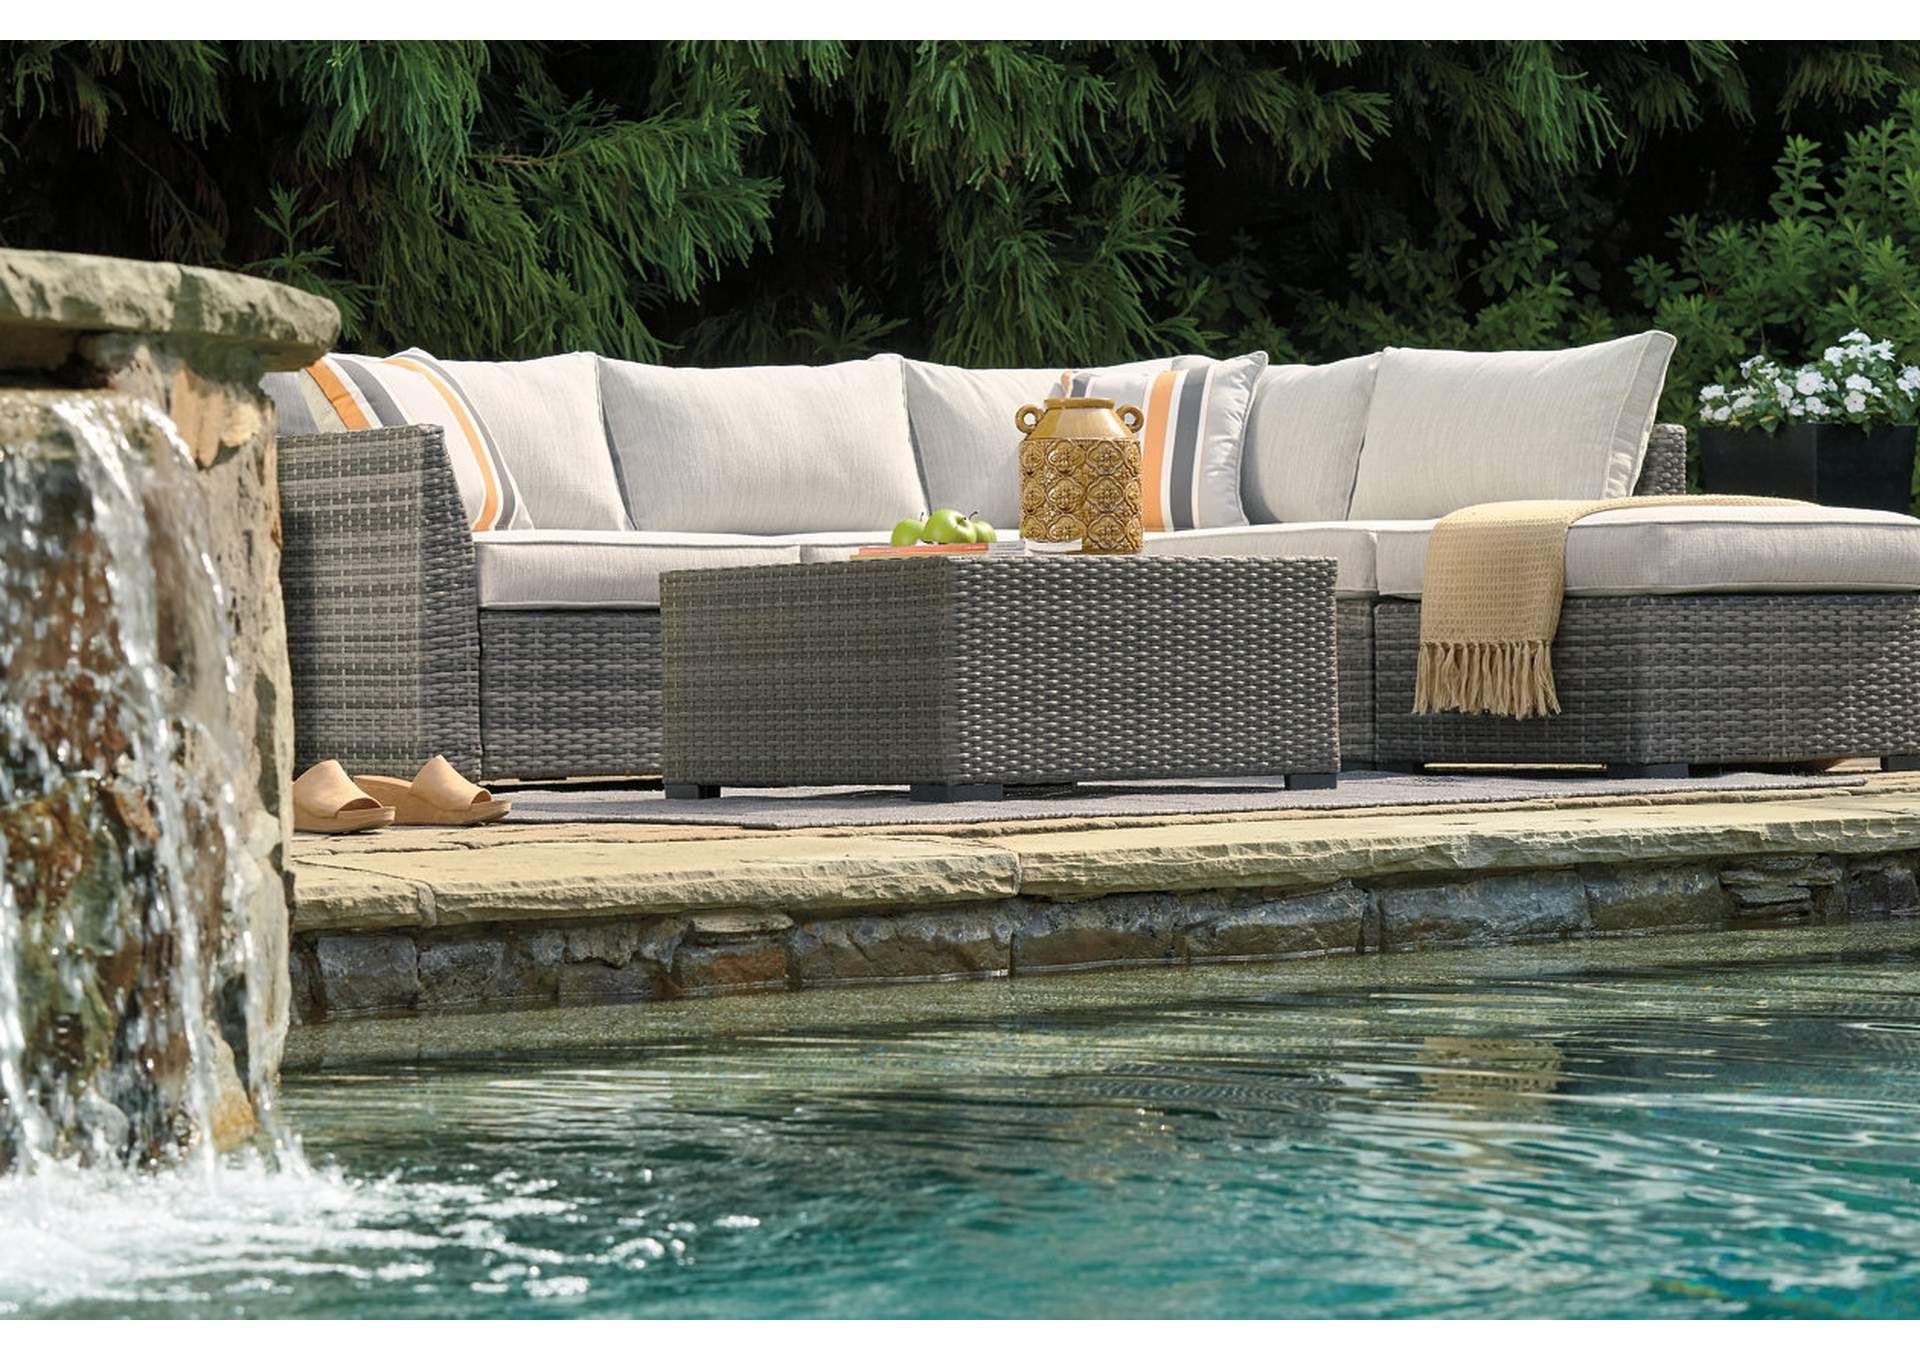 Most Recently Released Cherry Point 4 Piece Outdoor Sectional Set Ashley Furniture Homestore Pertaining To 4 Piece Outdoor Sectional Patio Sets (View 13 of 15)